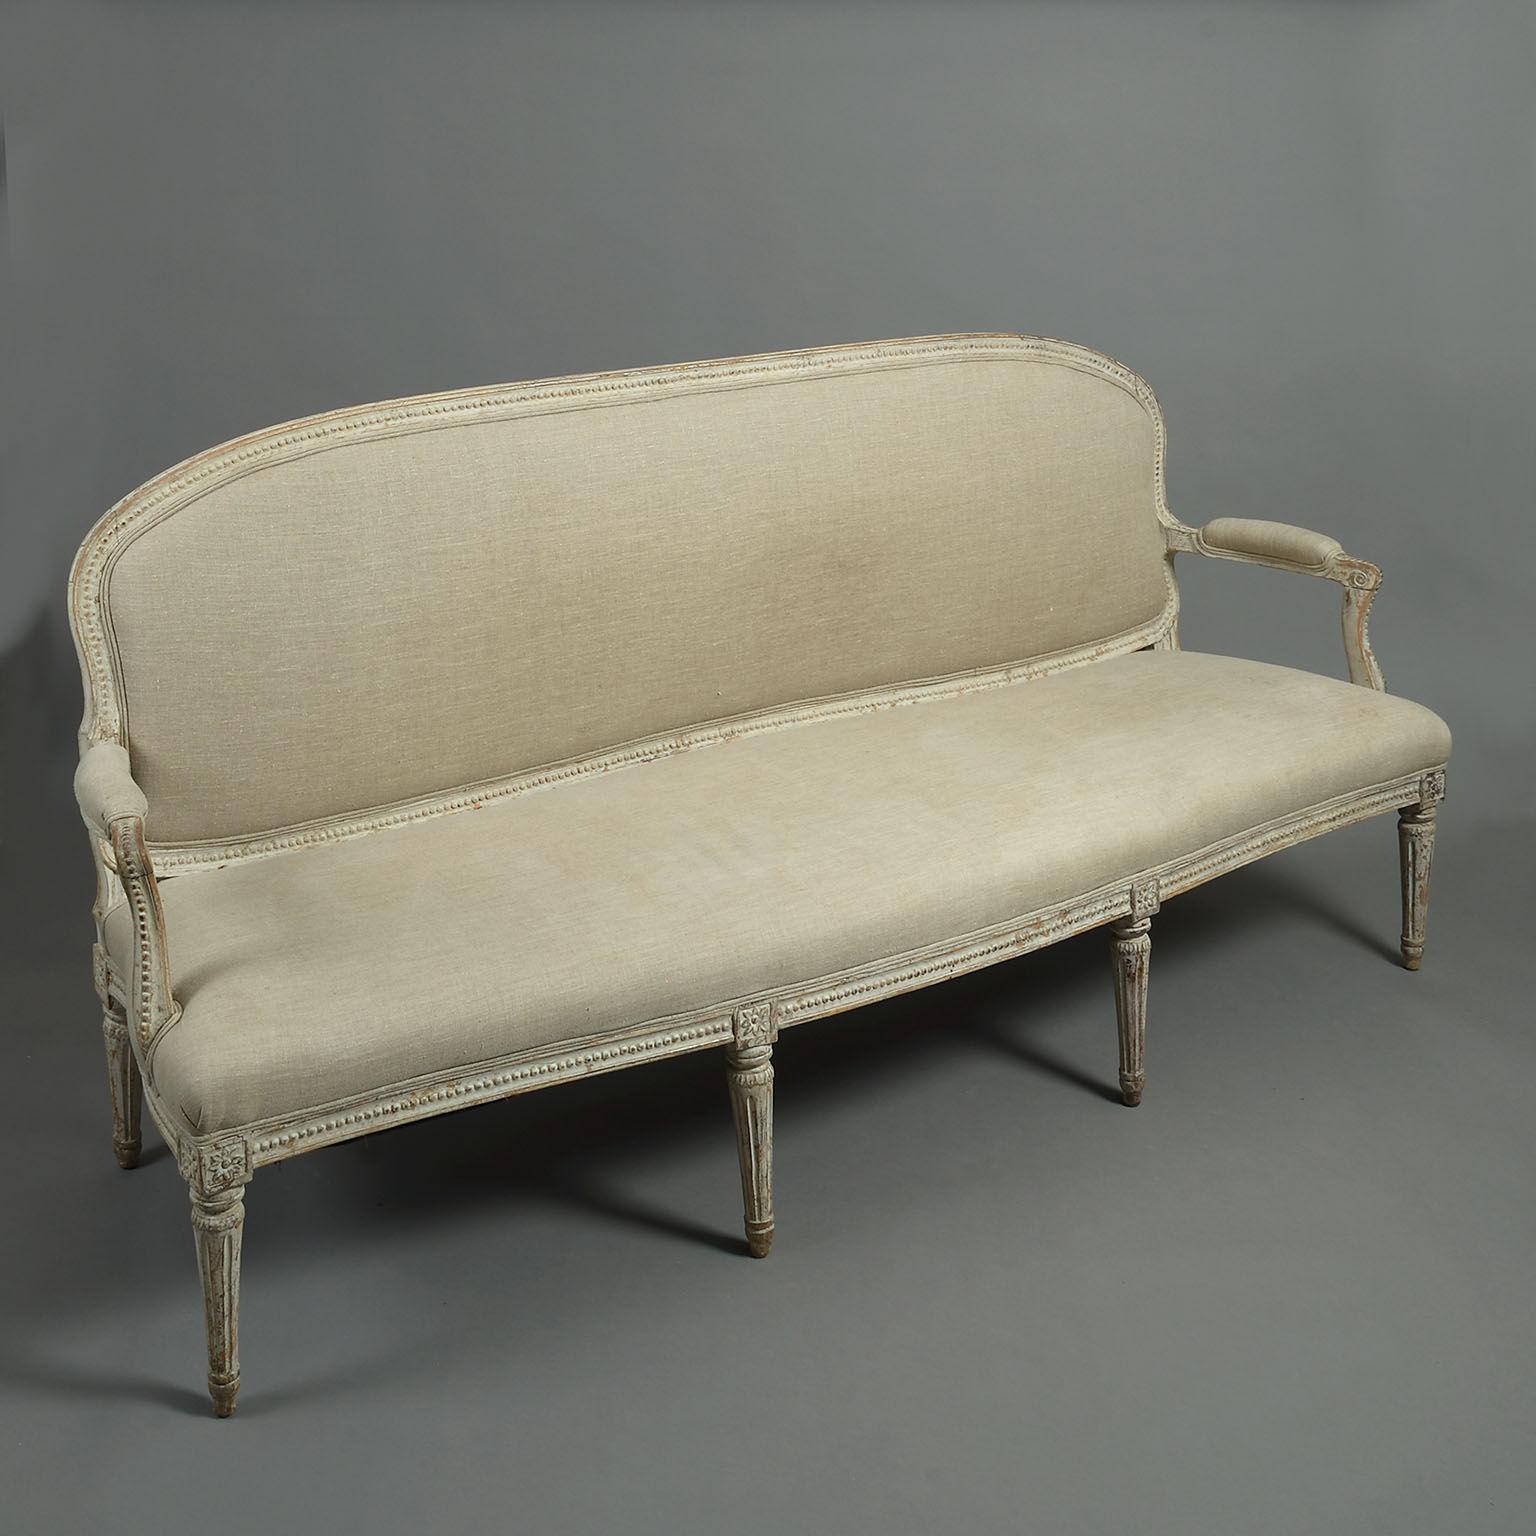 A Louis XVI sofa or canape with elegantly moulded frame carved with bead decoration surrounding the cartouche-shaped padded back. The out-swept padded arm with scrolled fronts supported on similarly bead-decorated arm supports. Upholstered in